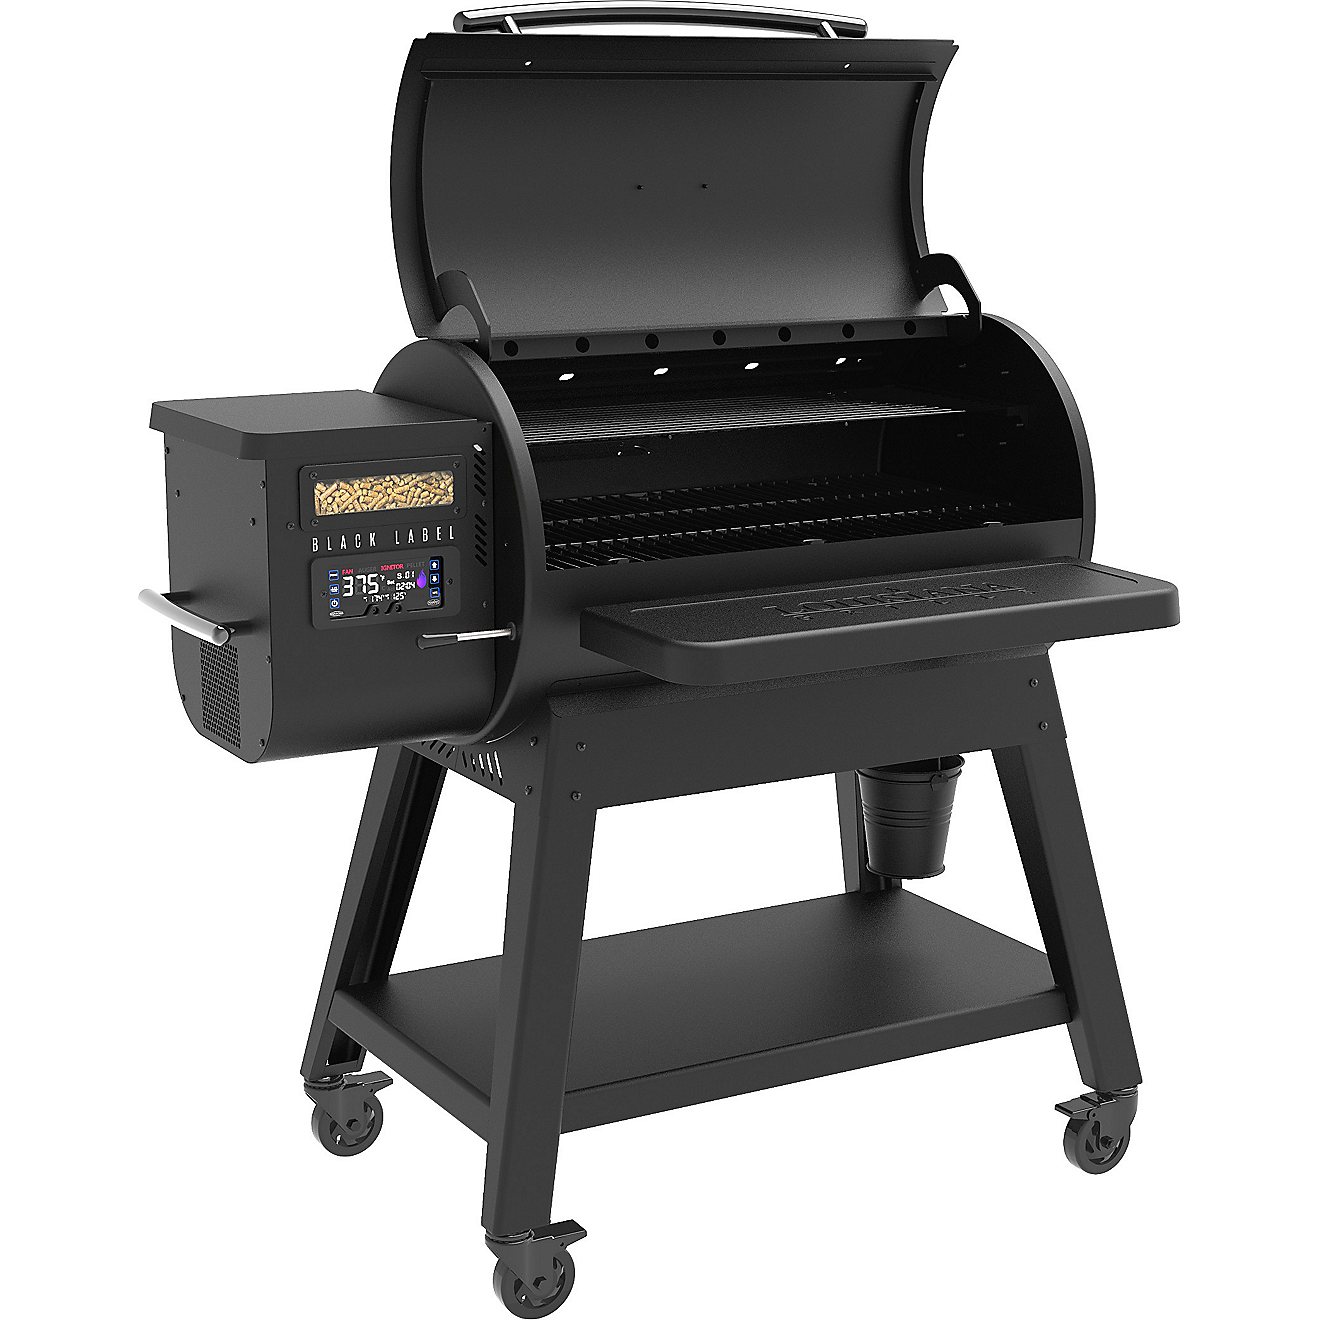 Louisiana Grills 1000 Black Label Pellet Grill                                                                                   - view number 3